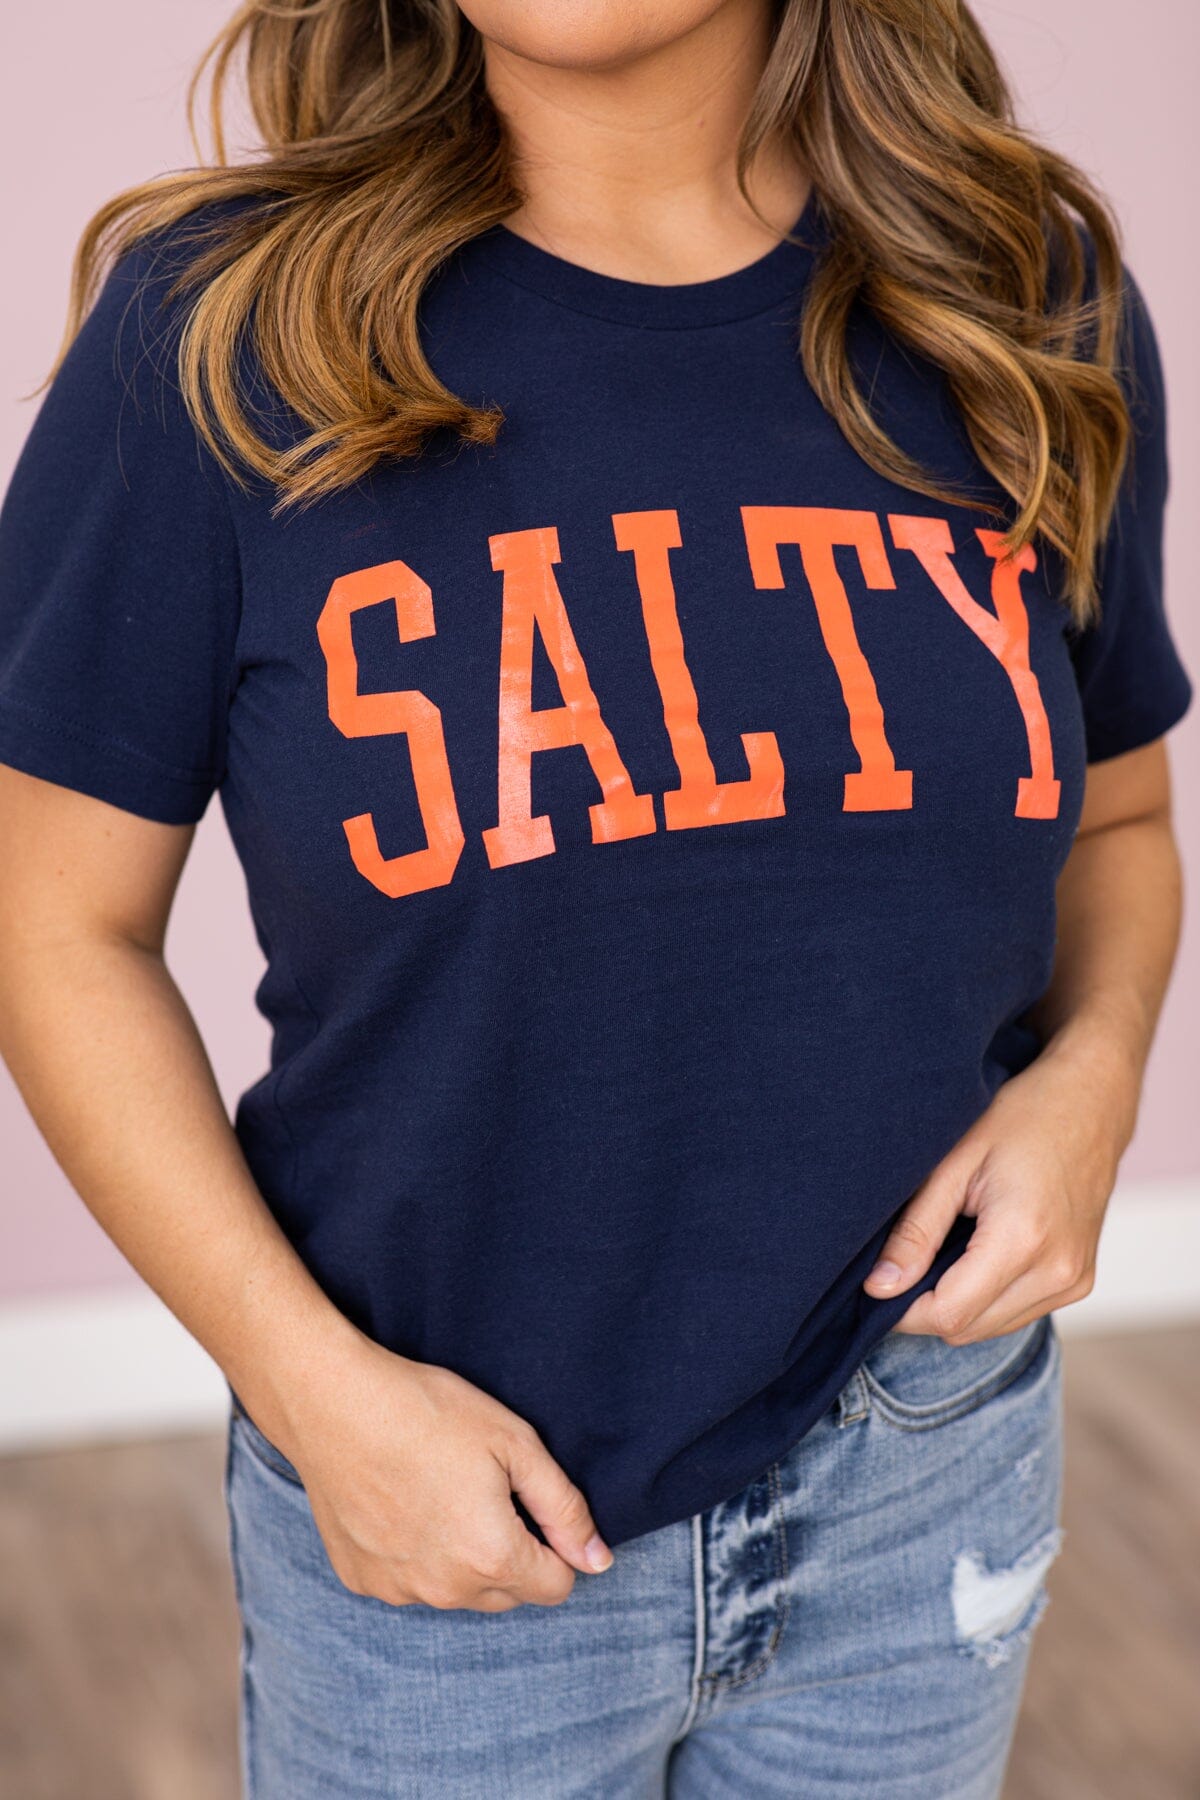 Navy and Orange Salty Graphic Tee - Filly Flair